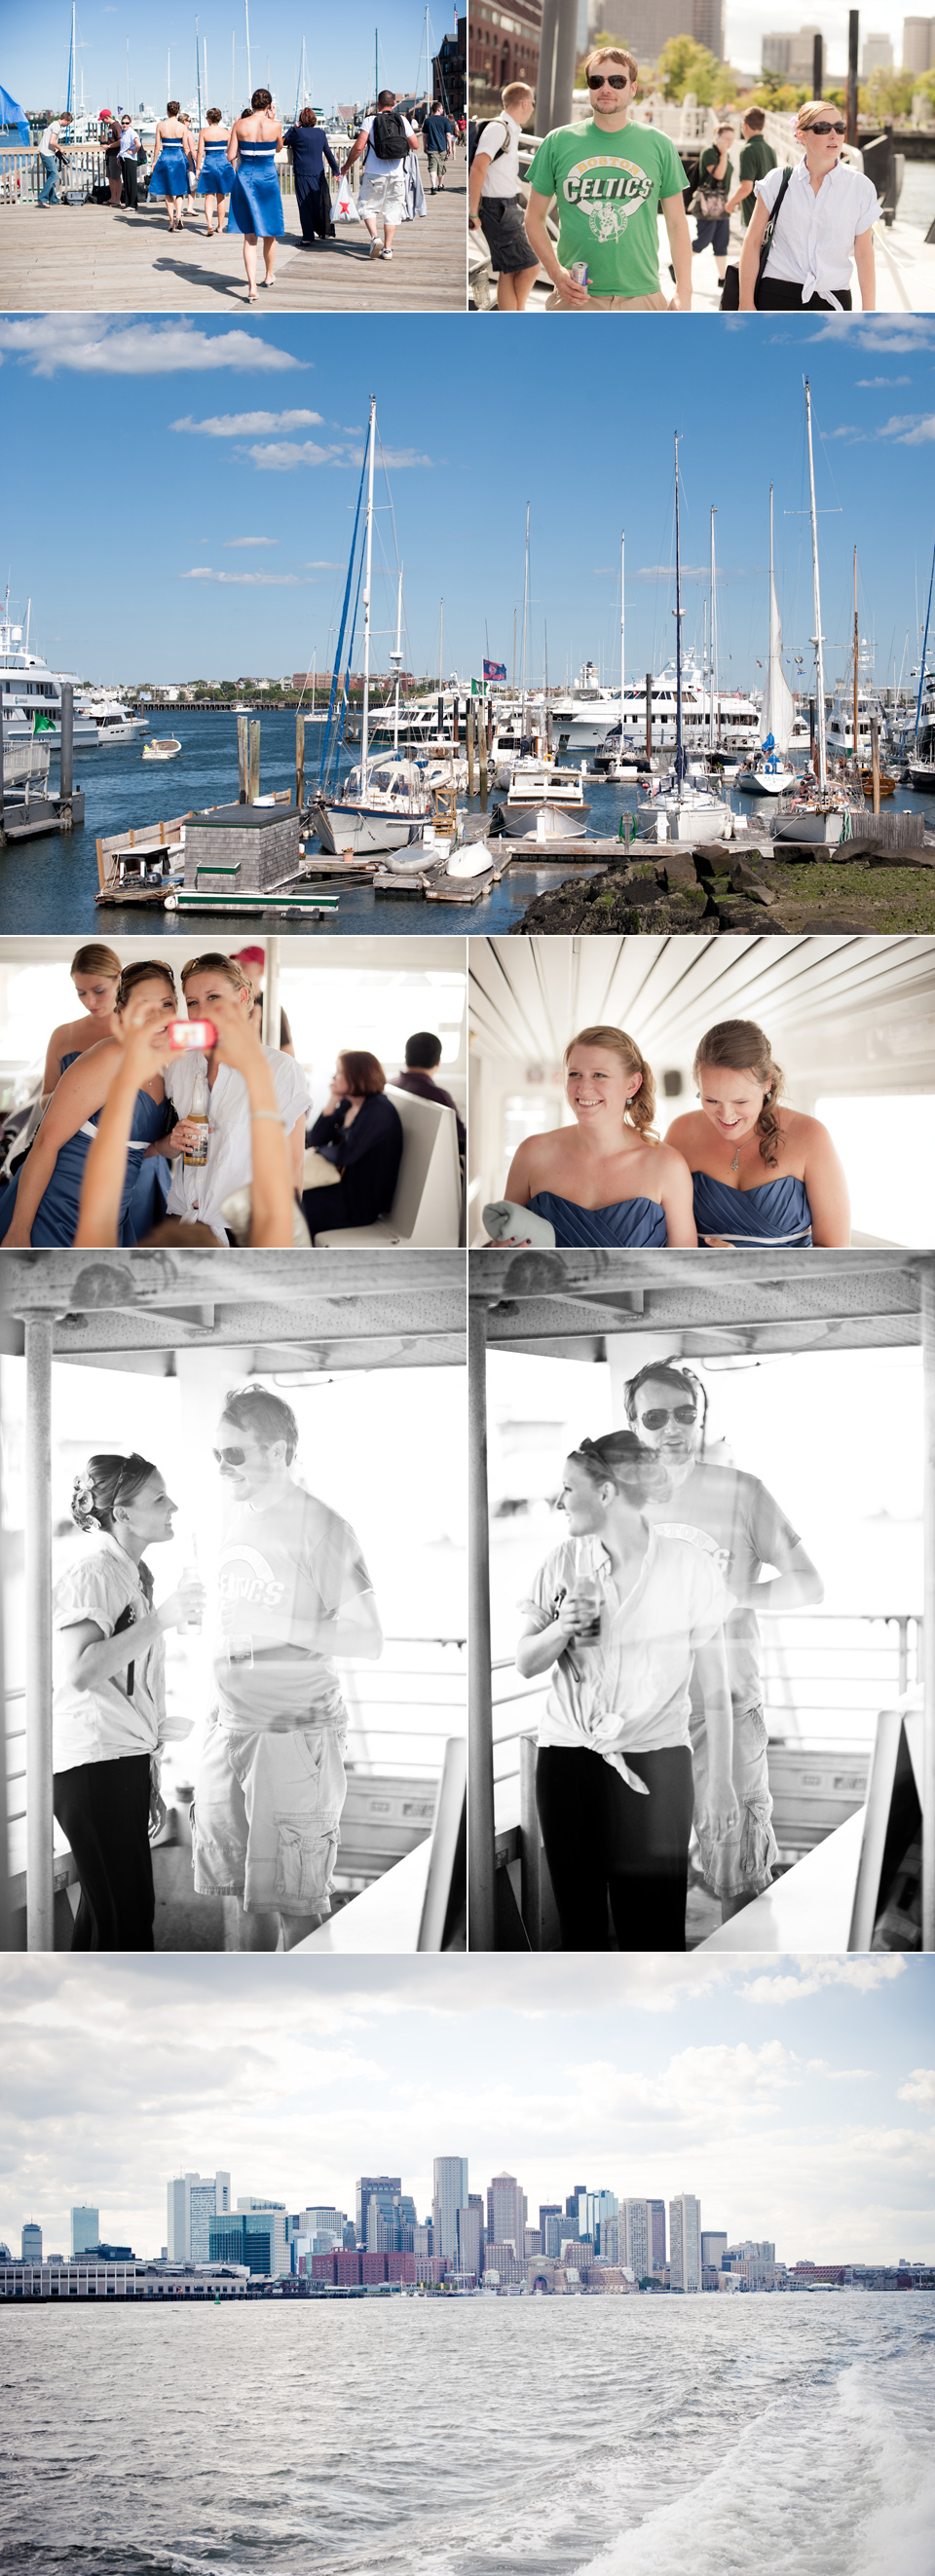 wedding party on boat